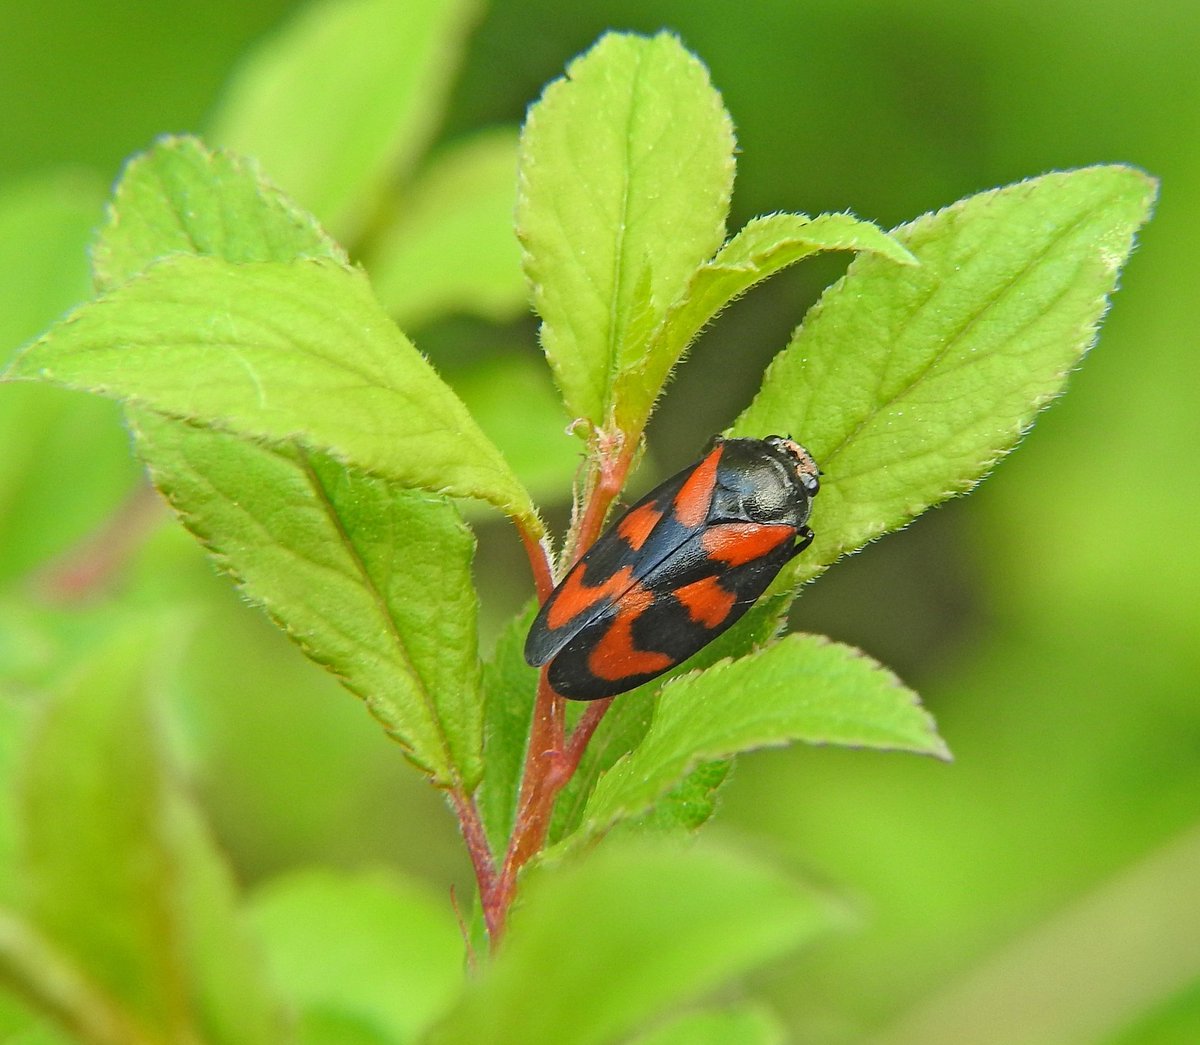 Red-and-Black Froghopper - Cercopis vulnerata
Beautiful little creature 😊
(Whittleford Park, Nuneaton, Warks 6/5/24) 

#insectsuk